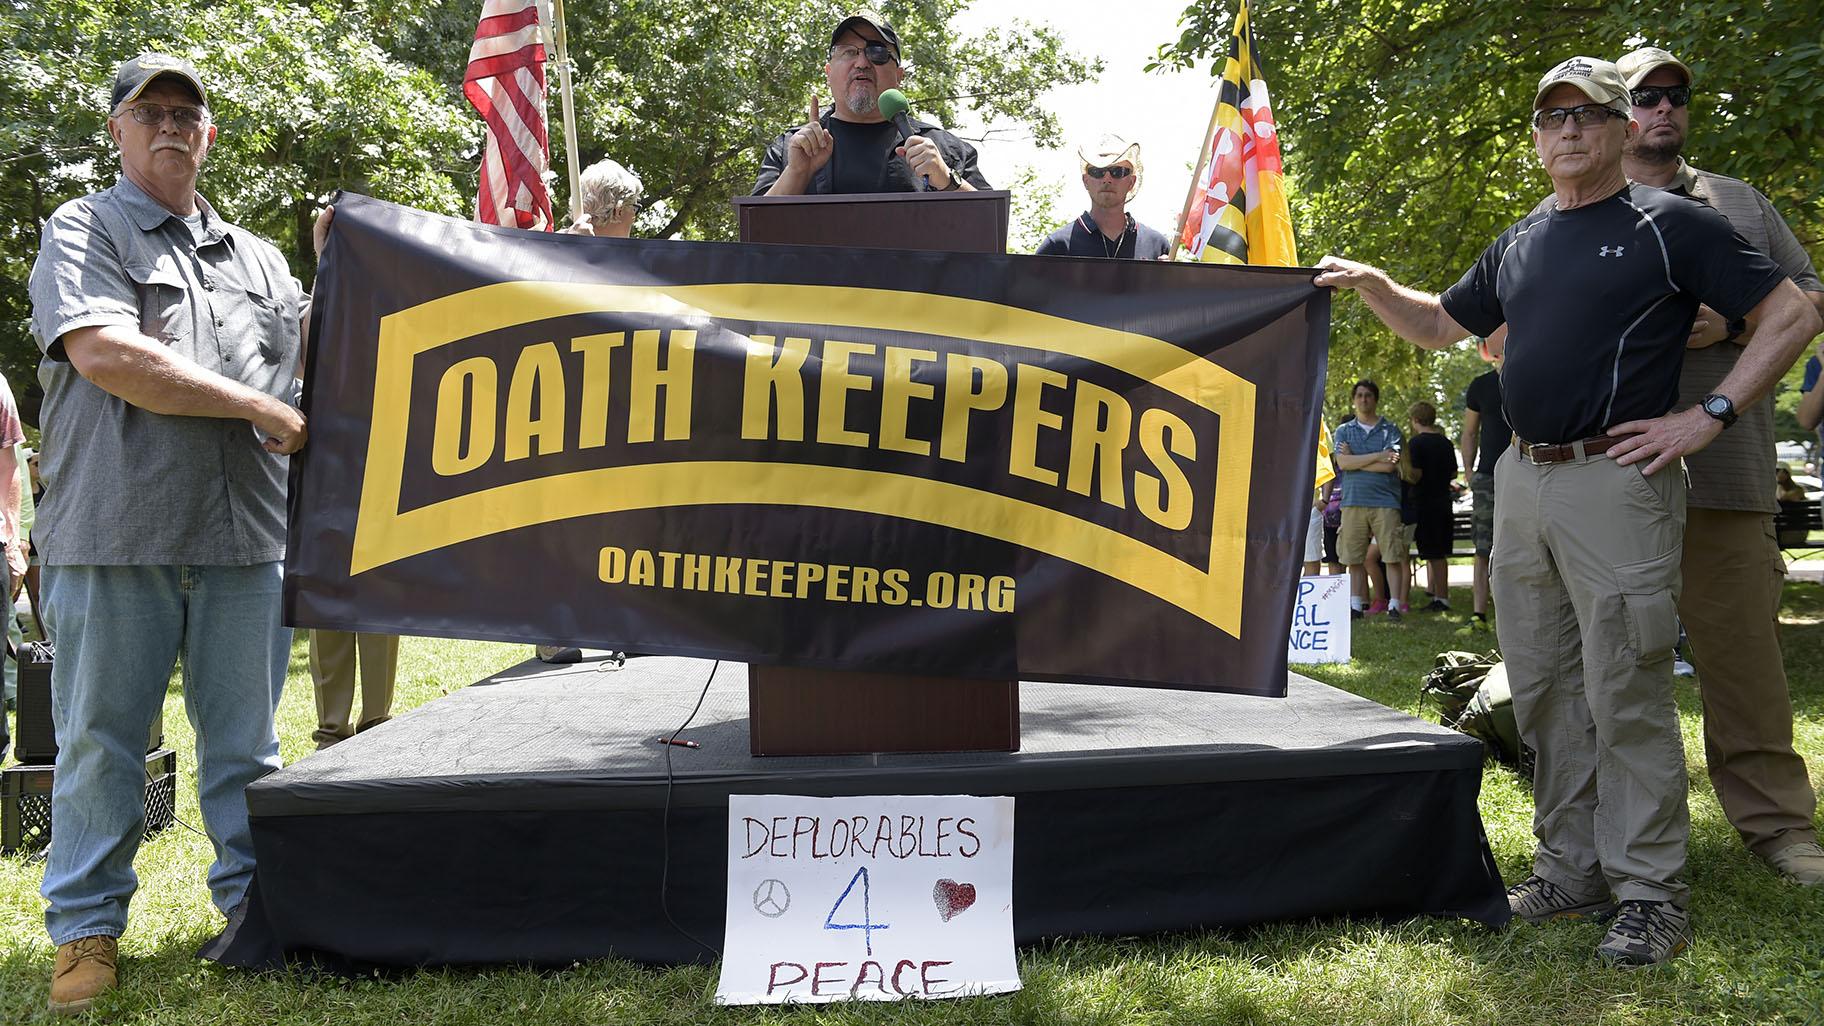 Stewart Rhodes, founder of the citizen militia group known as the Oath Keepers, center, speaks during a rally outside the White House in Washington, on June 25, 2017. (AP Photo / Susan Walsh, File)